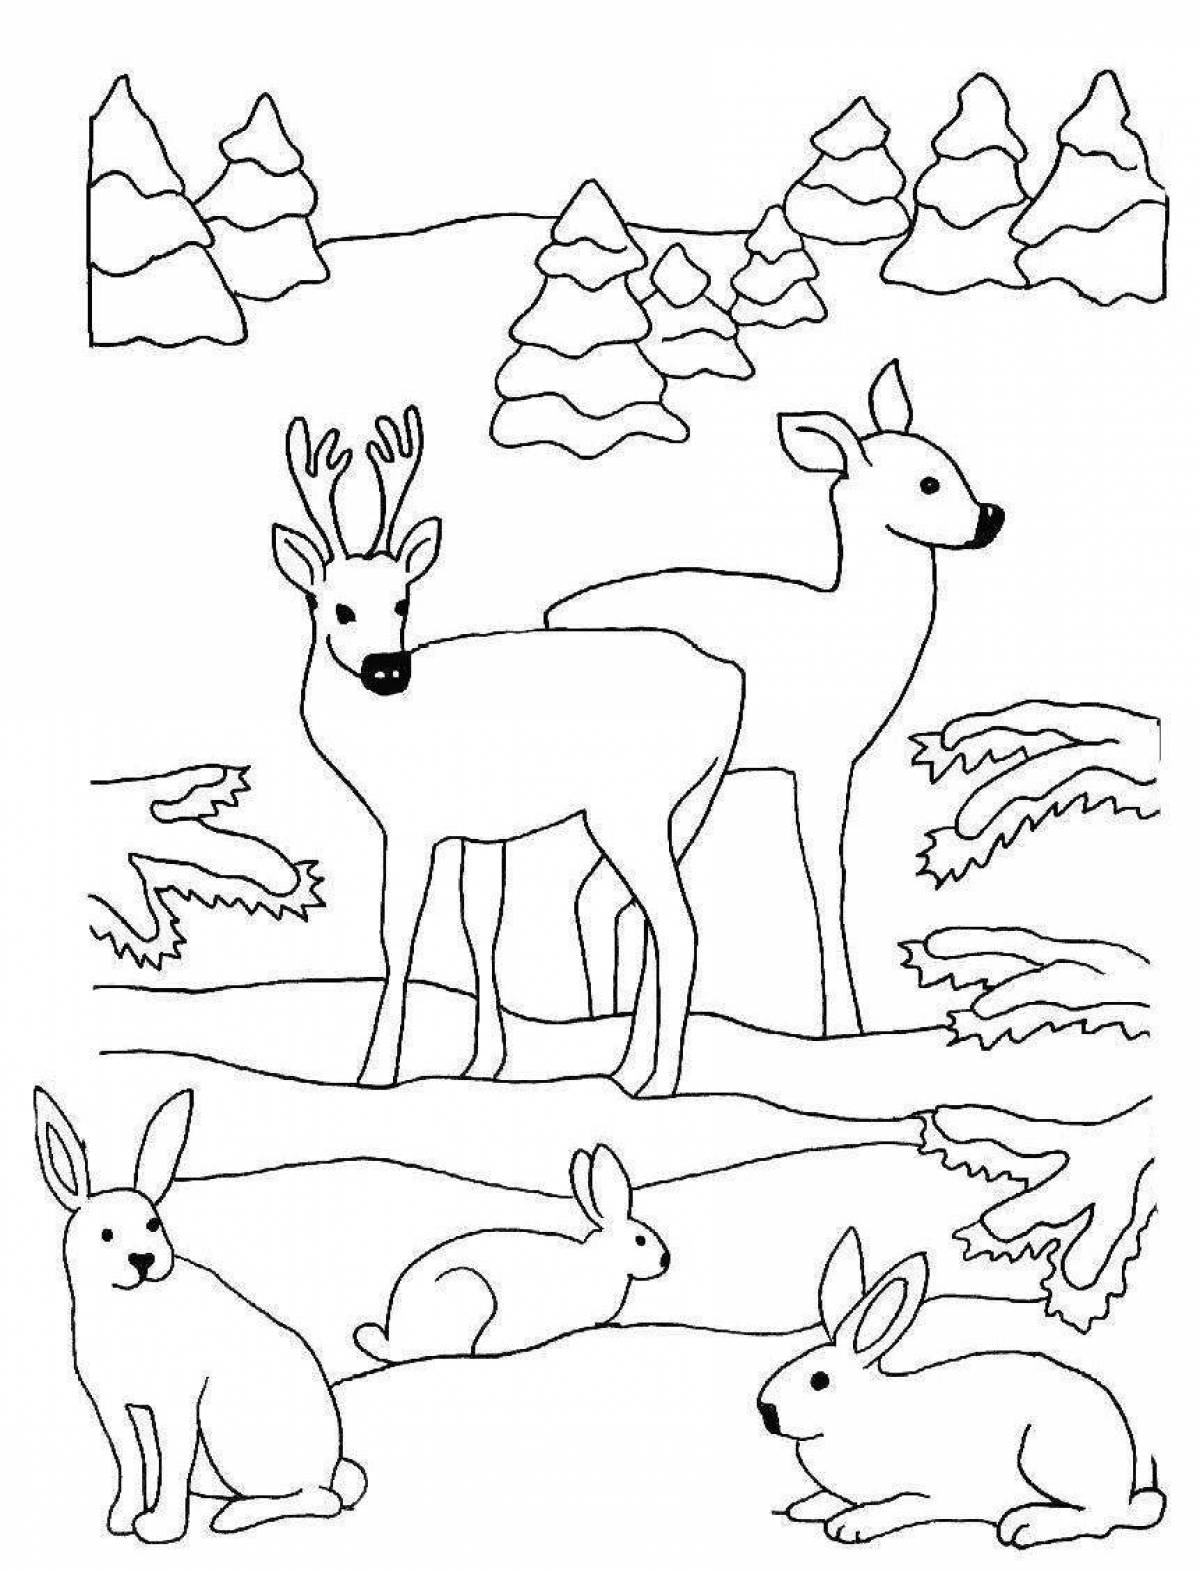 Glowing winter animals coloring book for 3-4 year olds